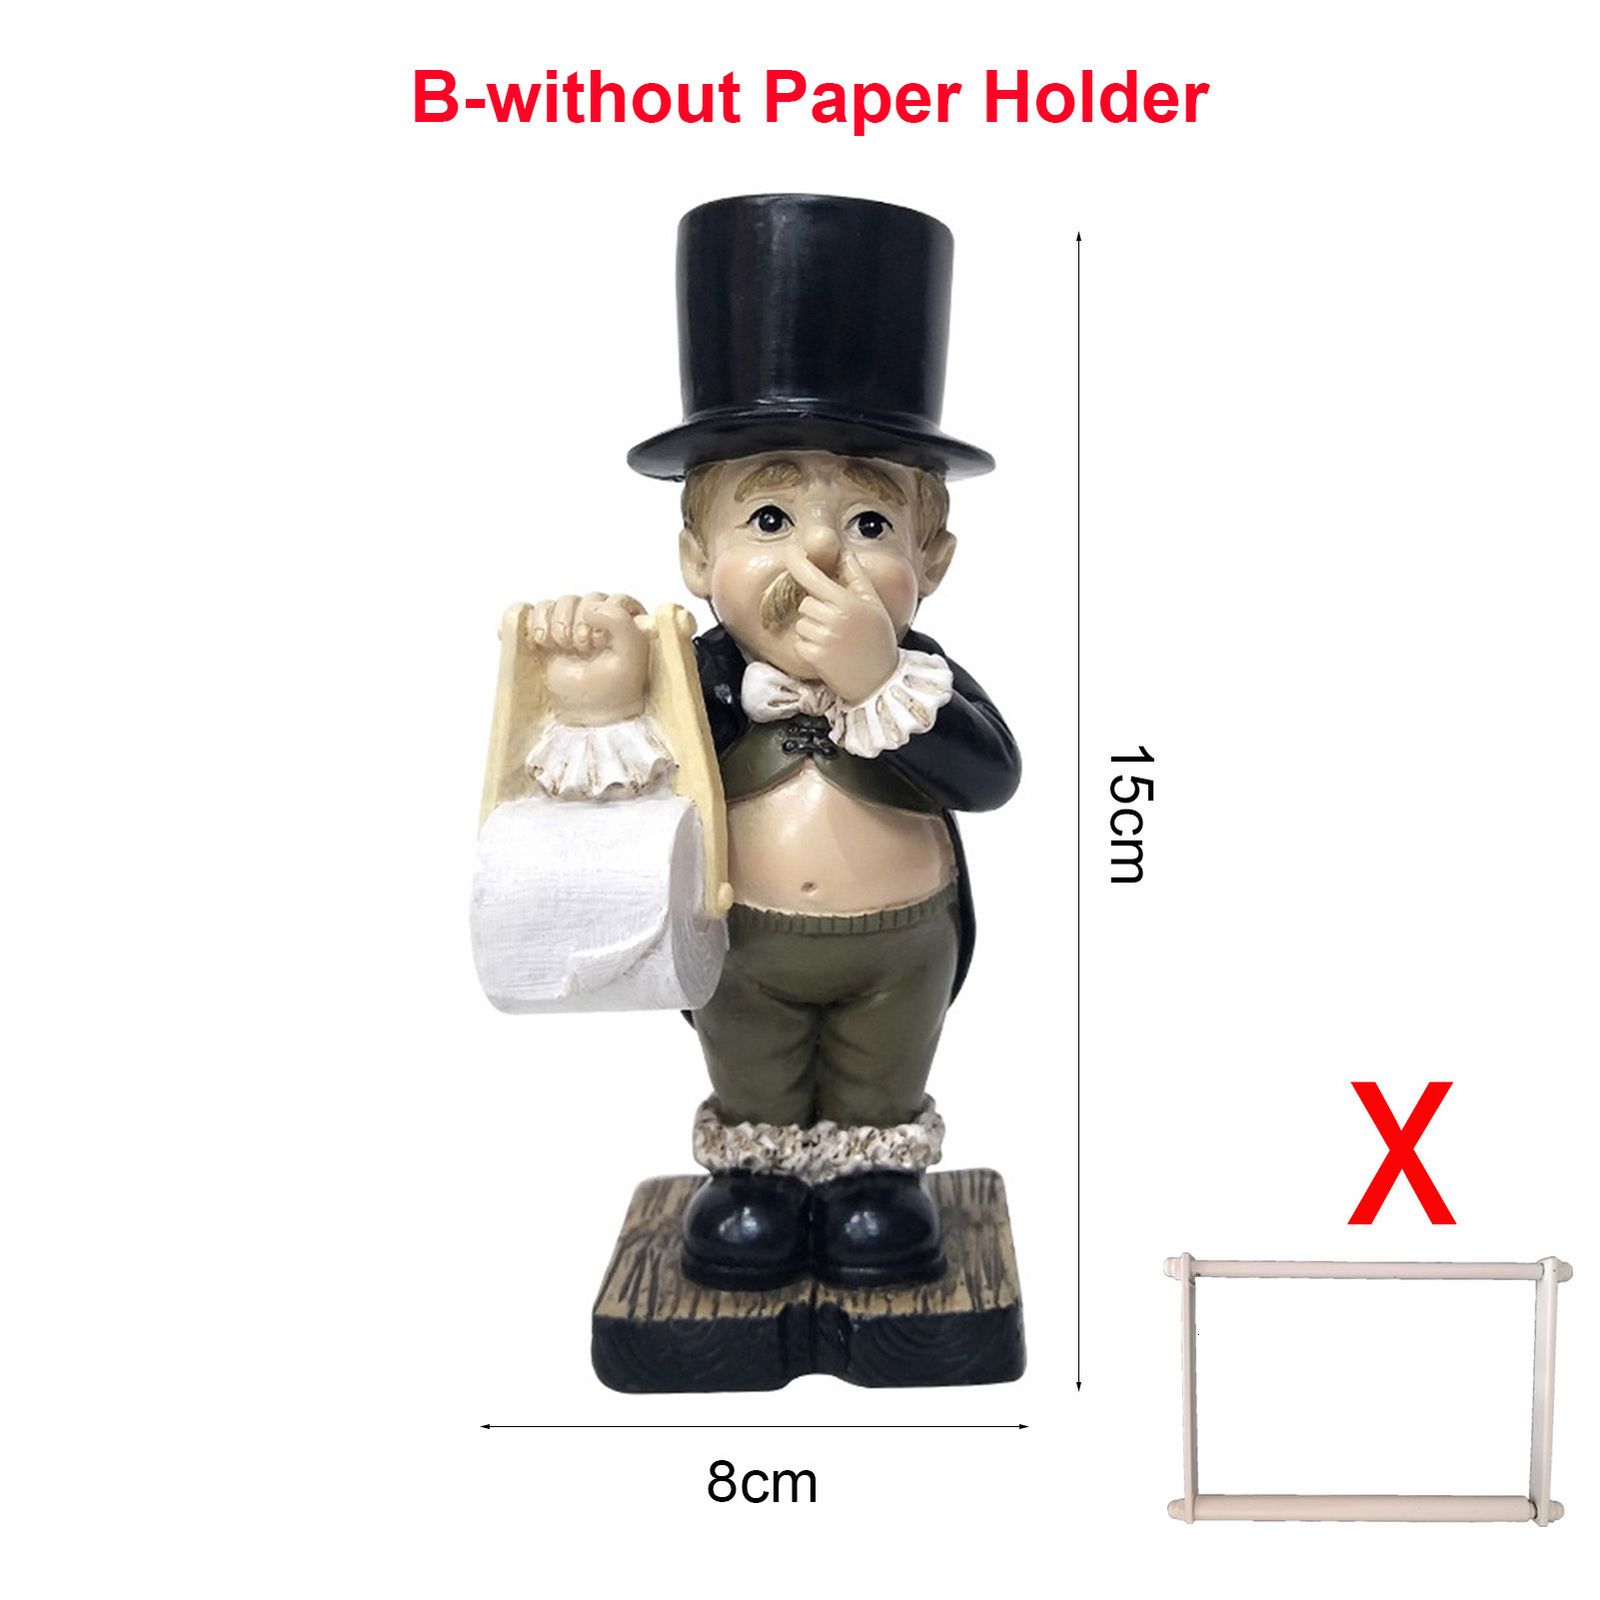 B-without holder